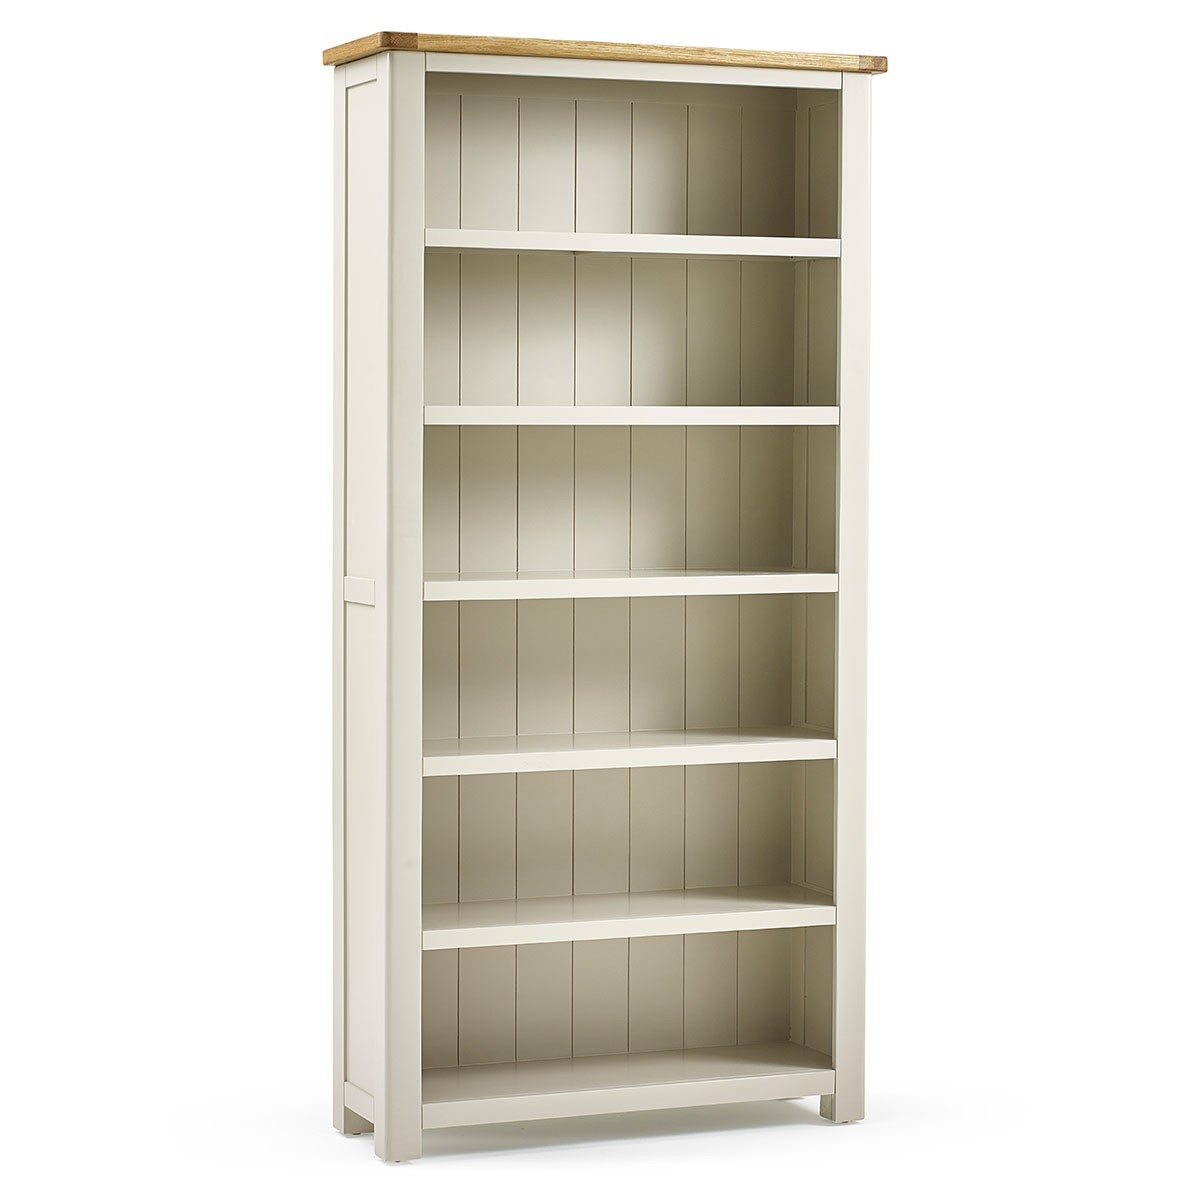 tall bookcase. larger image CNTNZXK